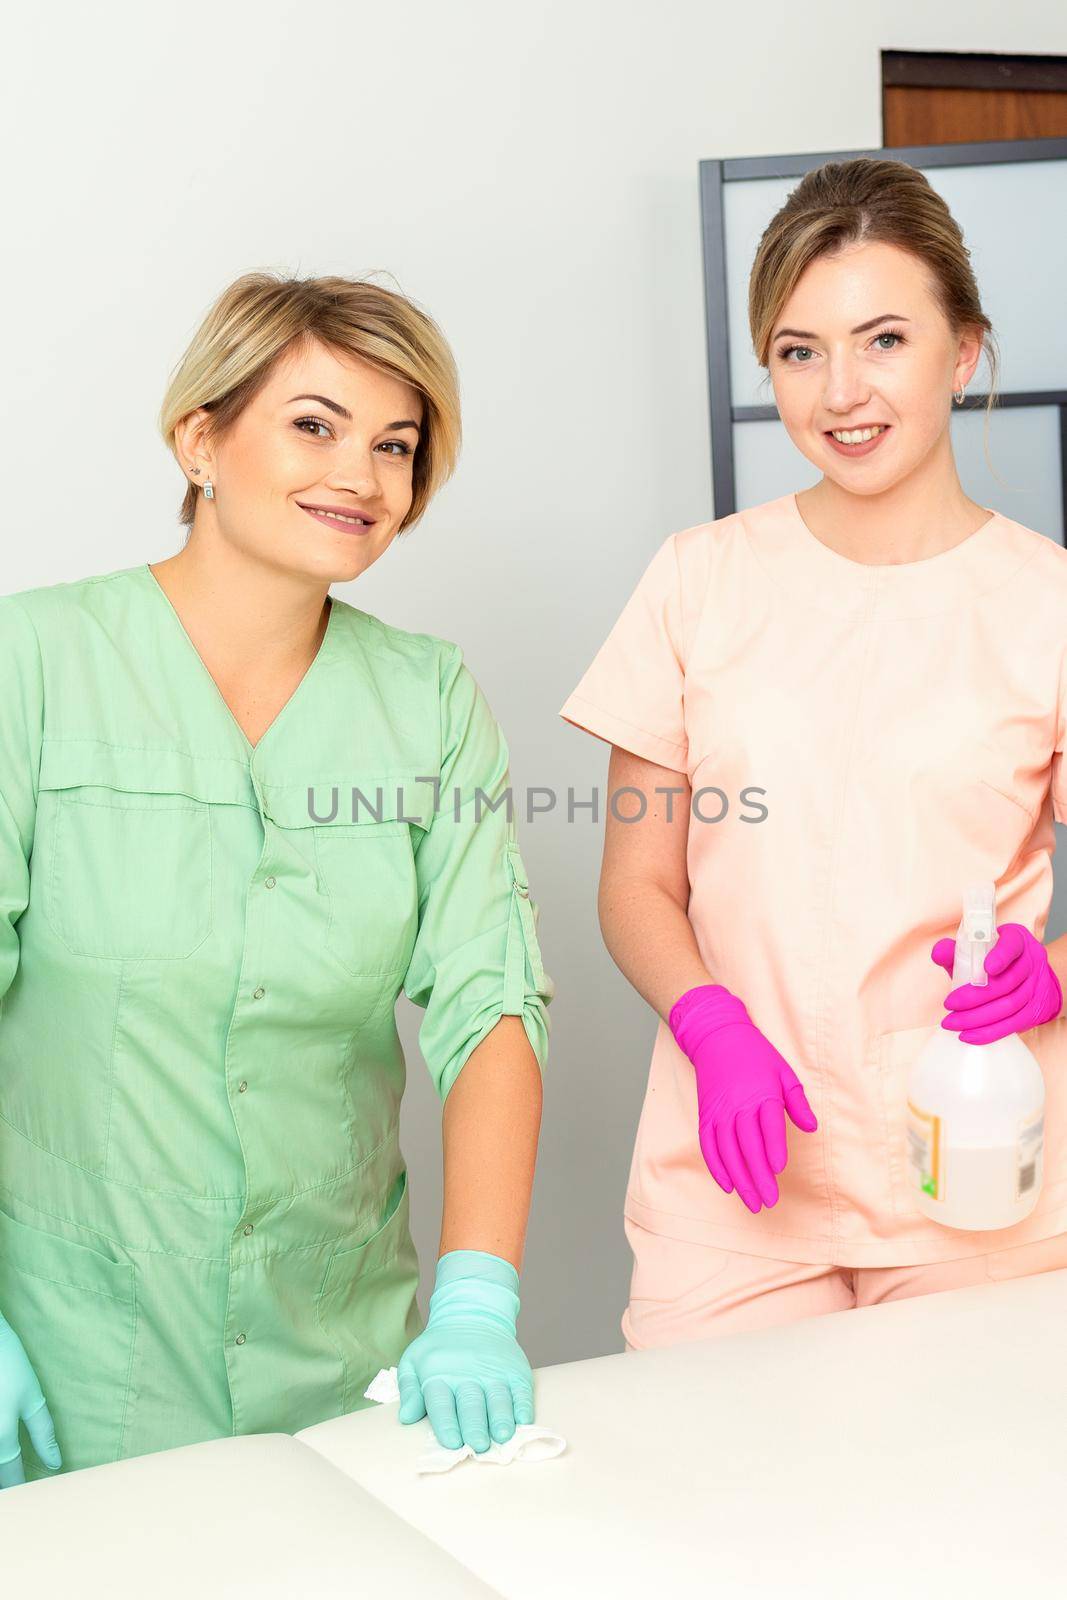 Two medical workers disinfect the patient's couch with sanitizer spray and a clean napkin. Health and hygiene concept